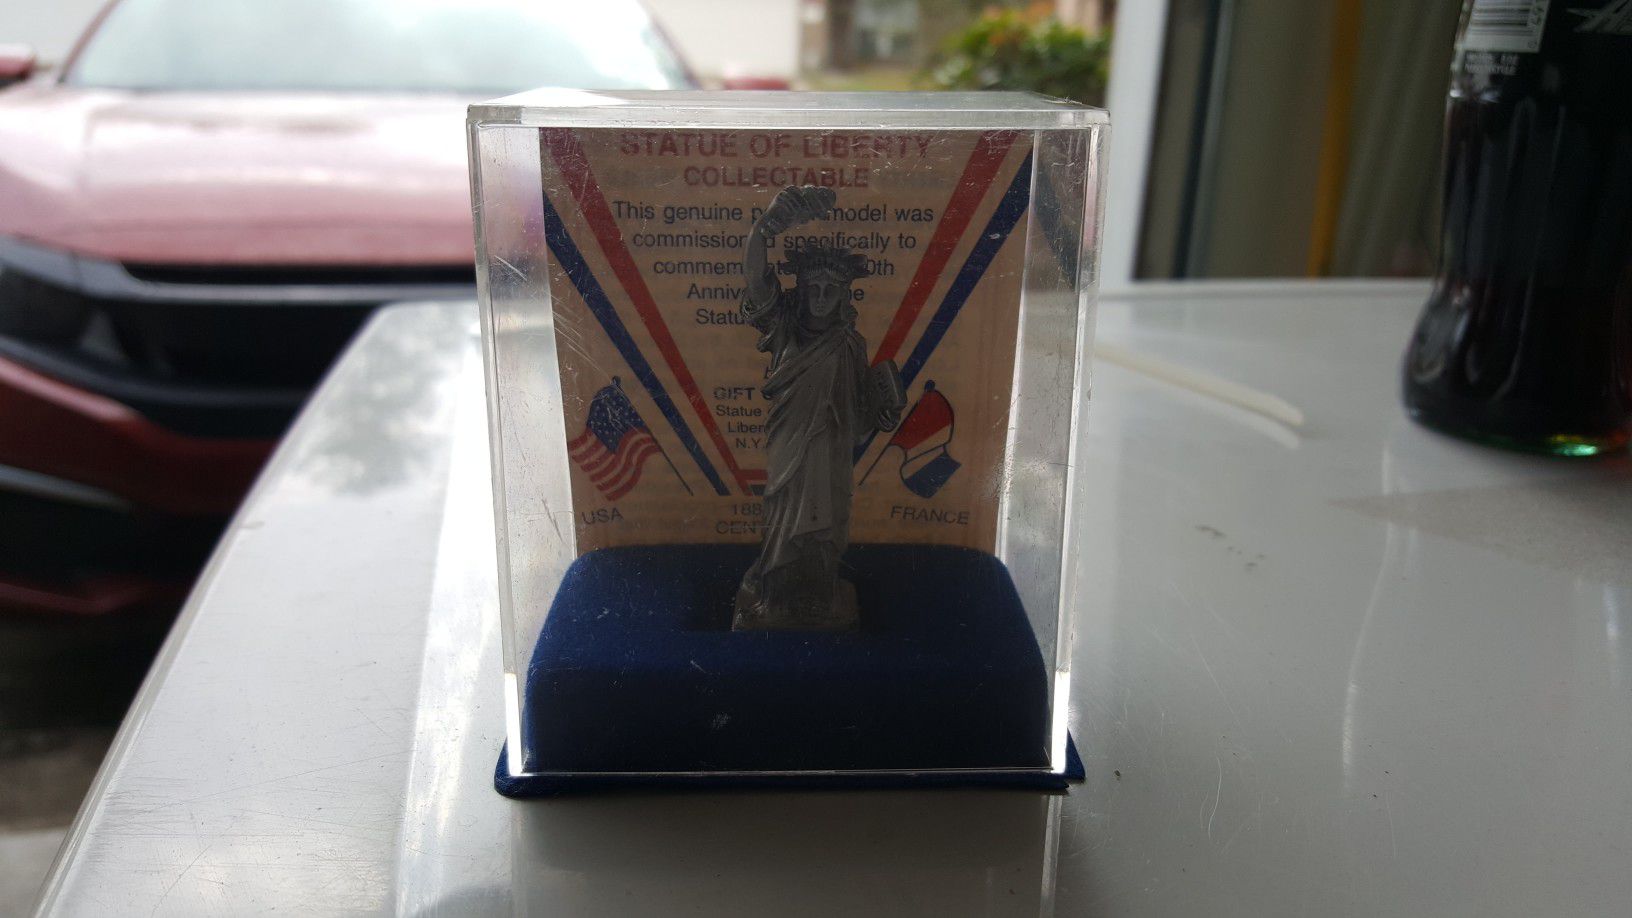 Statue of Liberty Centennial Pewter Figurine Collectible 1886-1986 (3 Inch)